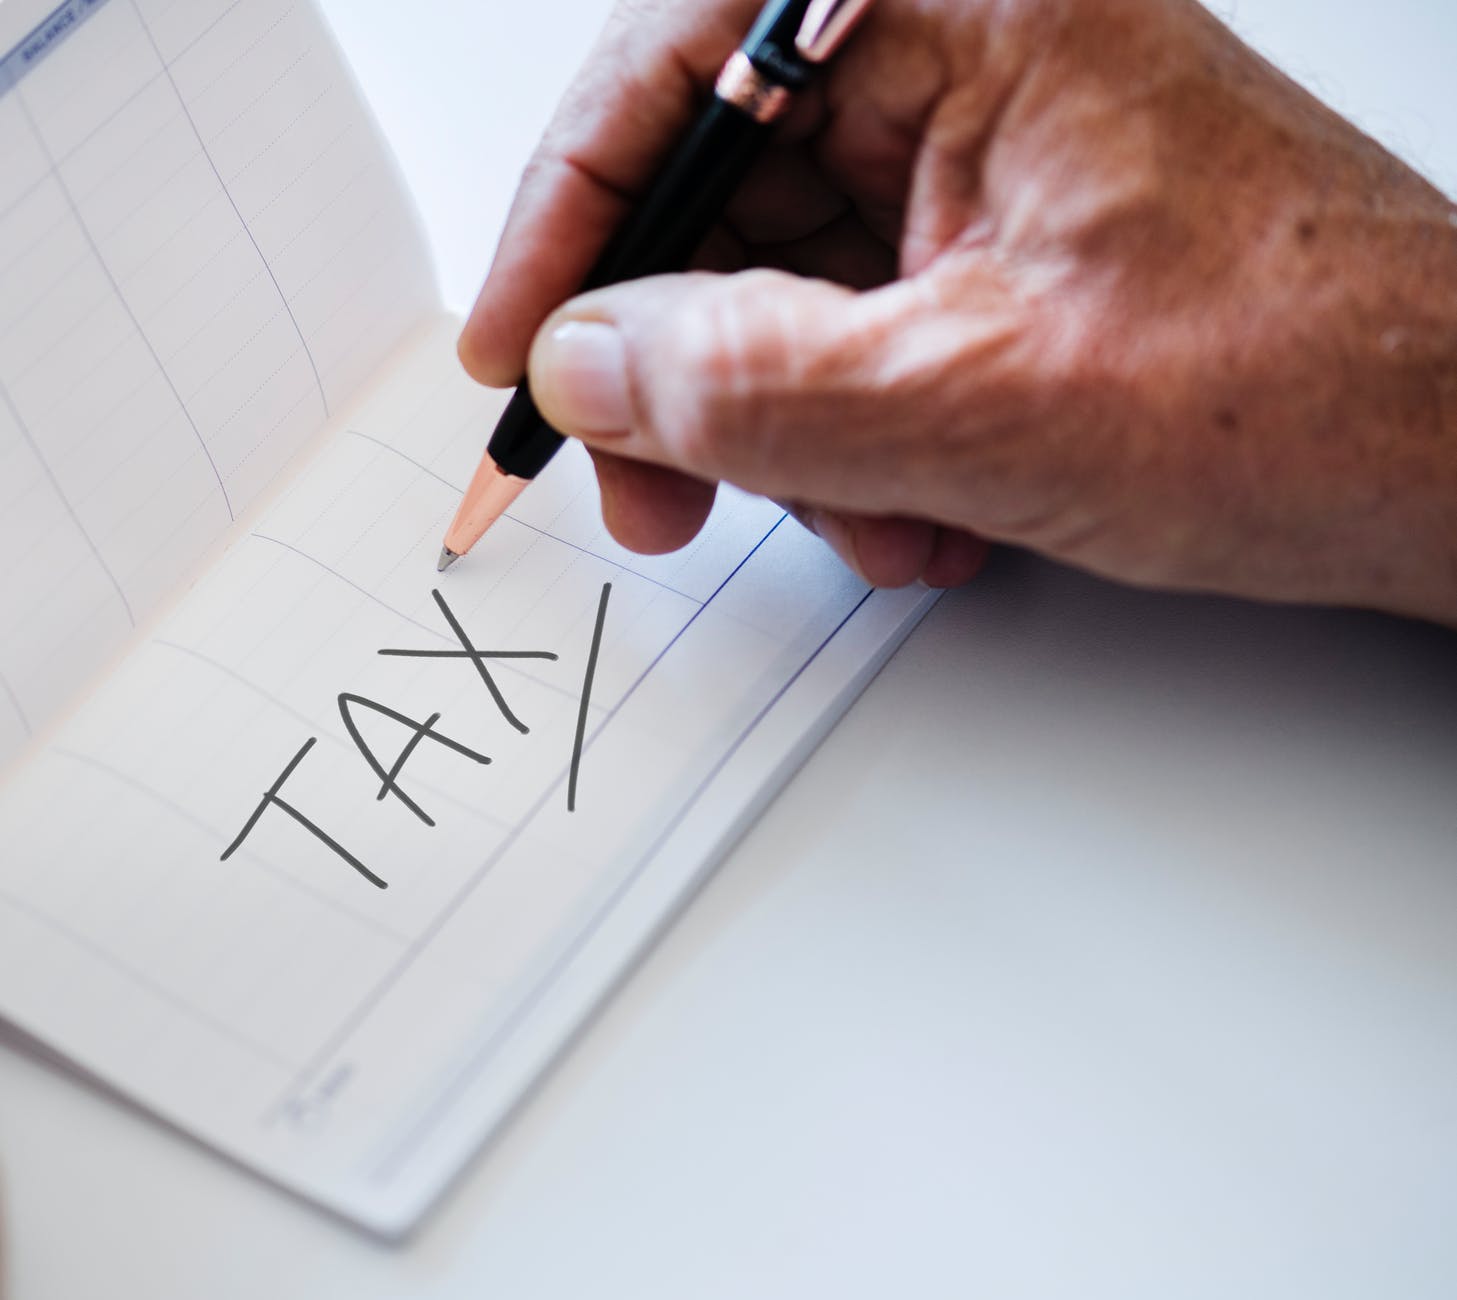 HMRC Gives Full Details of Wear and Tear Tax Changes